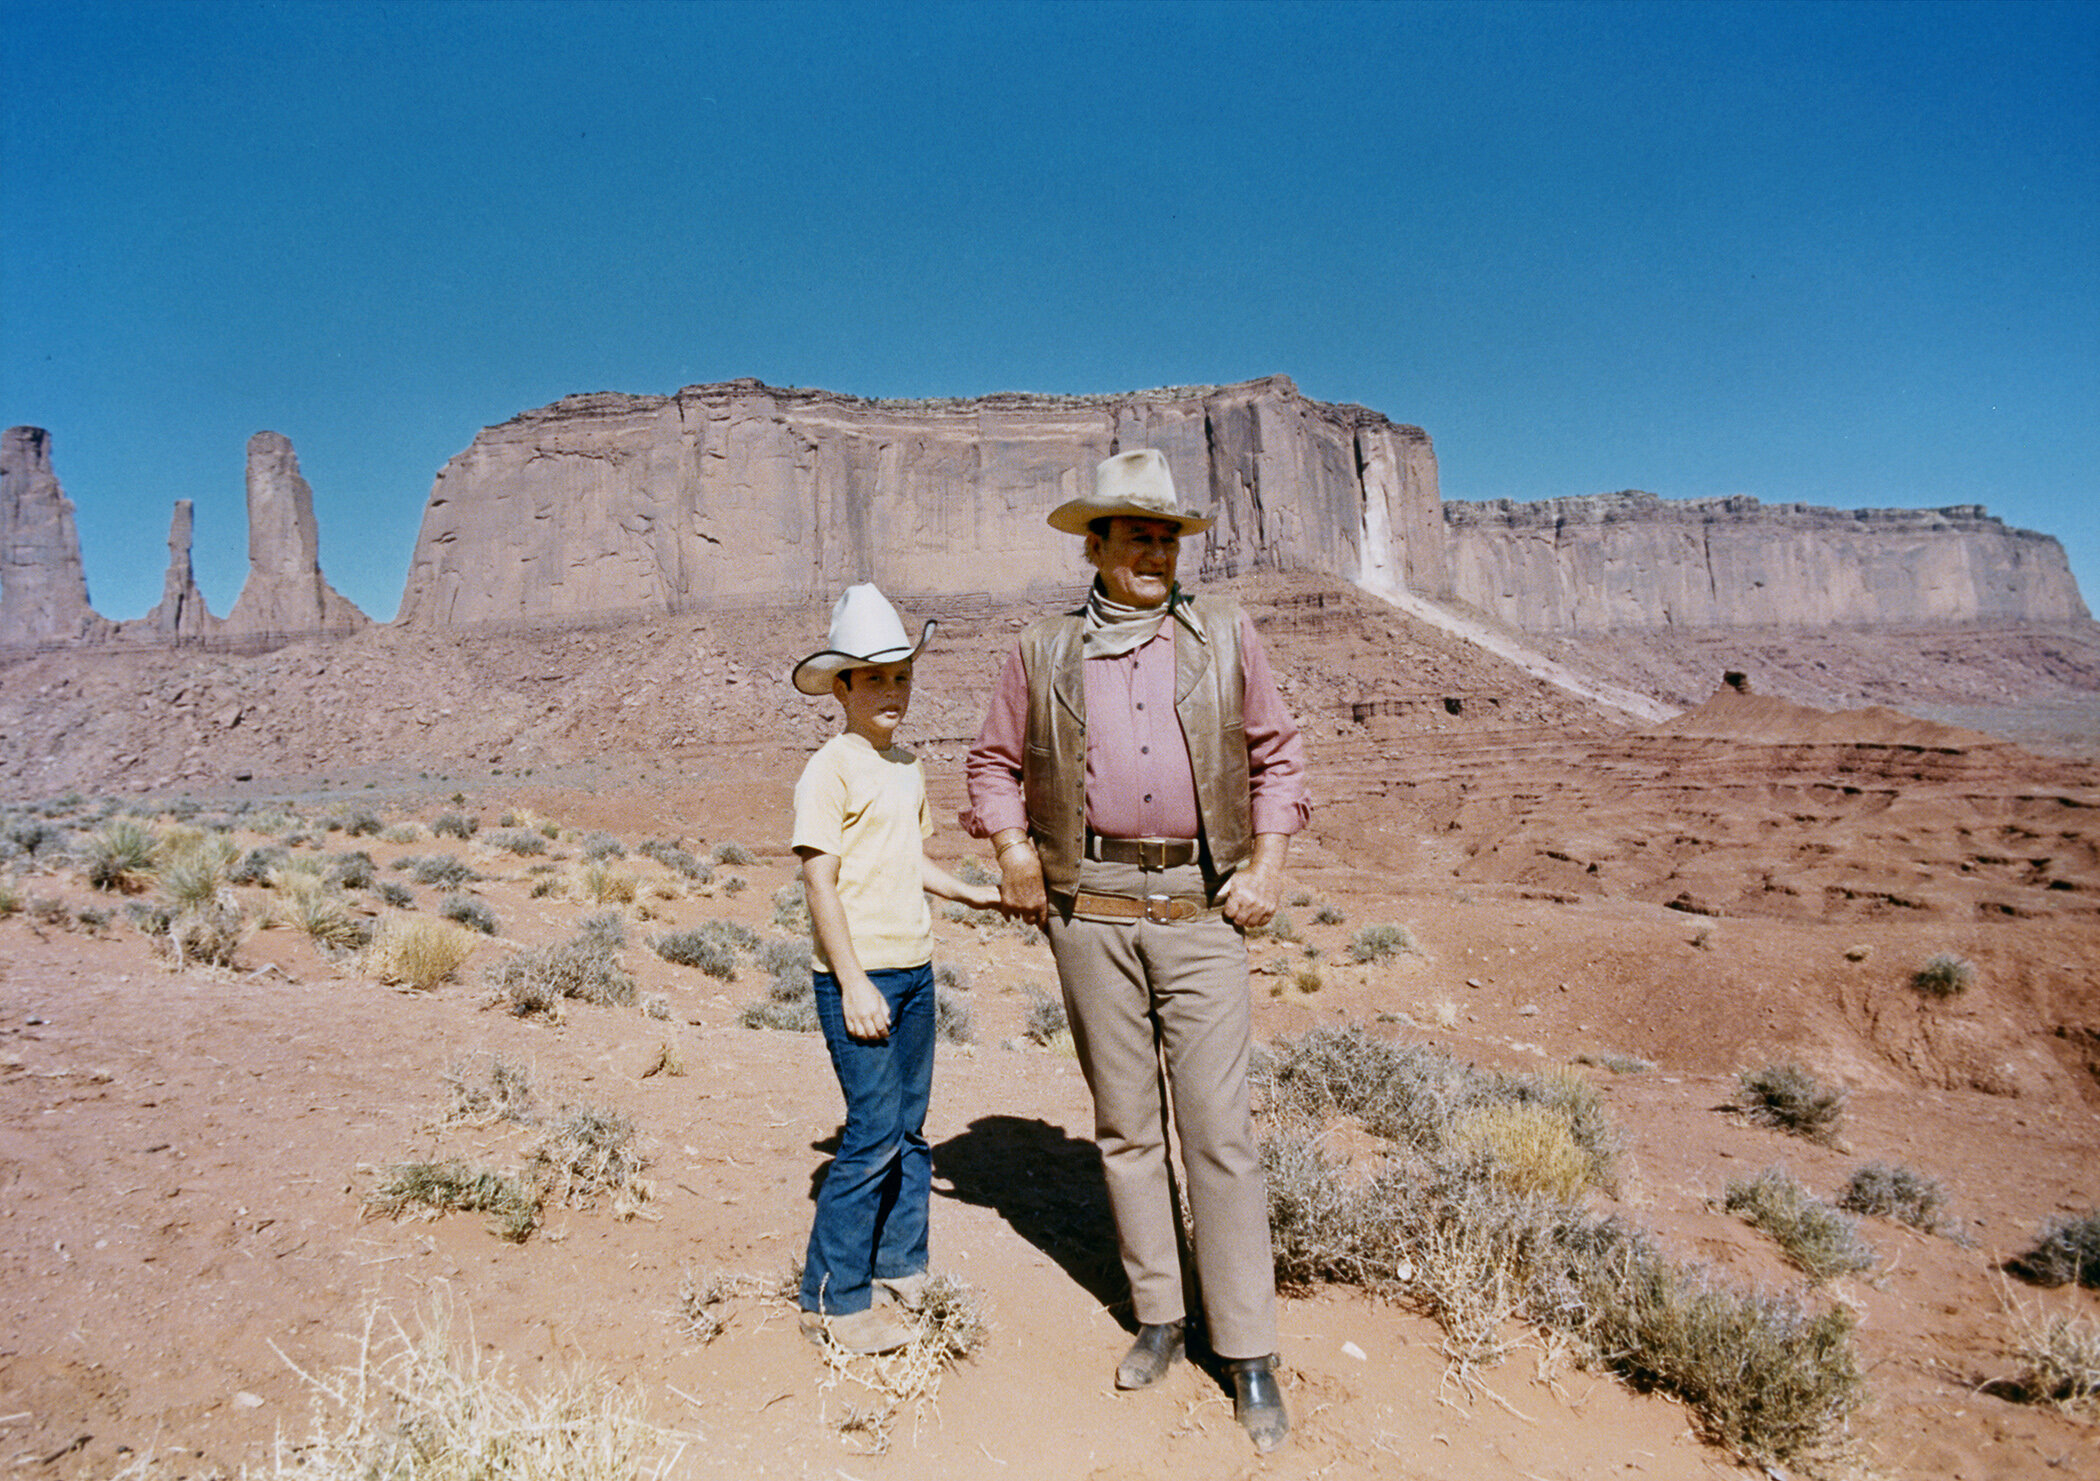 Ethan and his dad in Monument Valley.